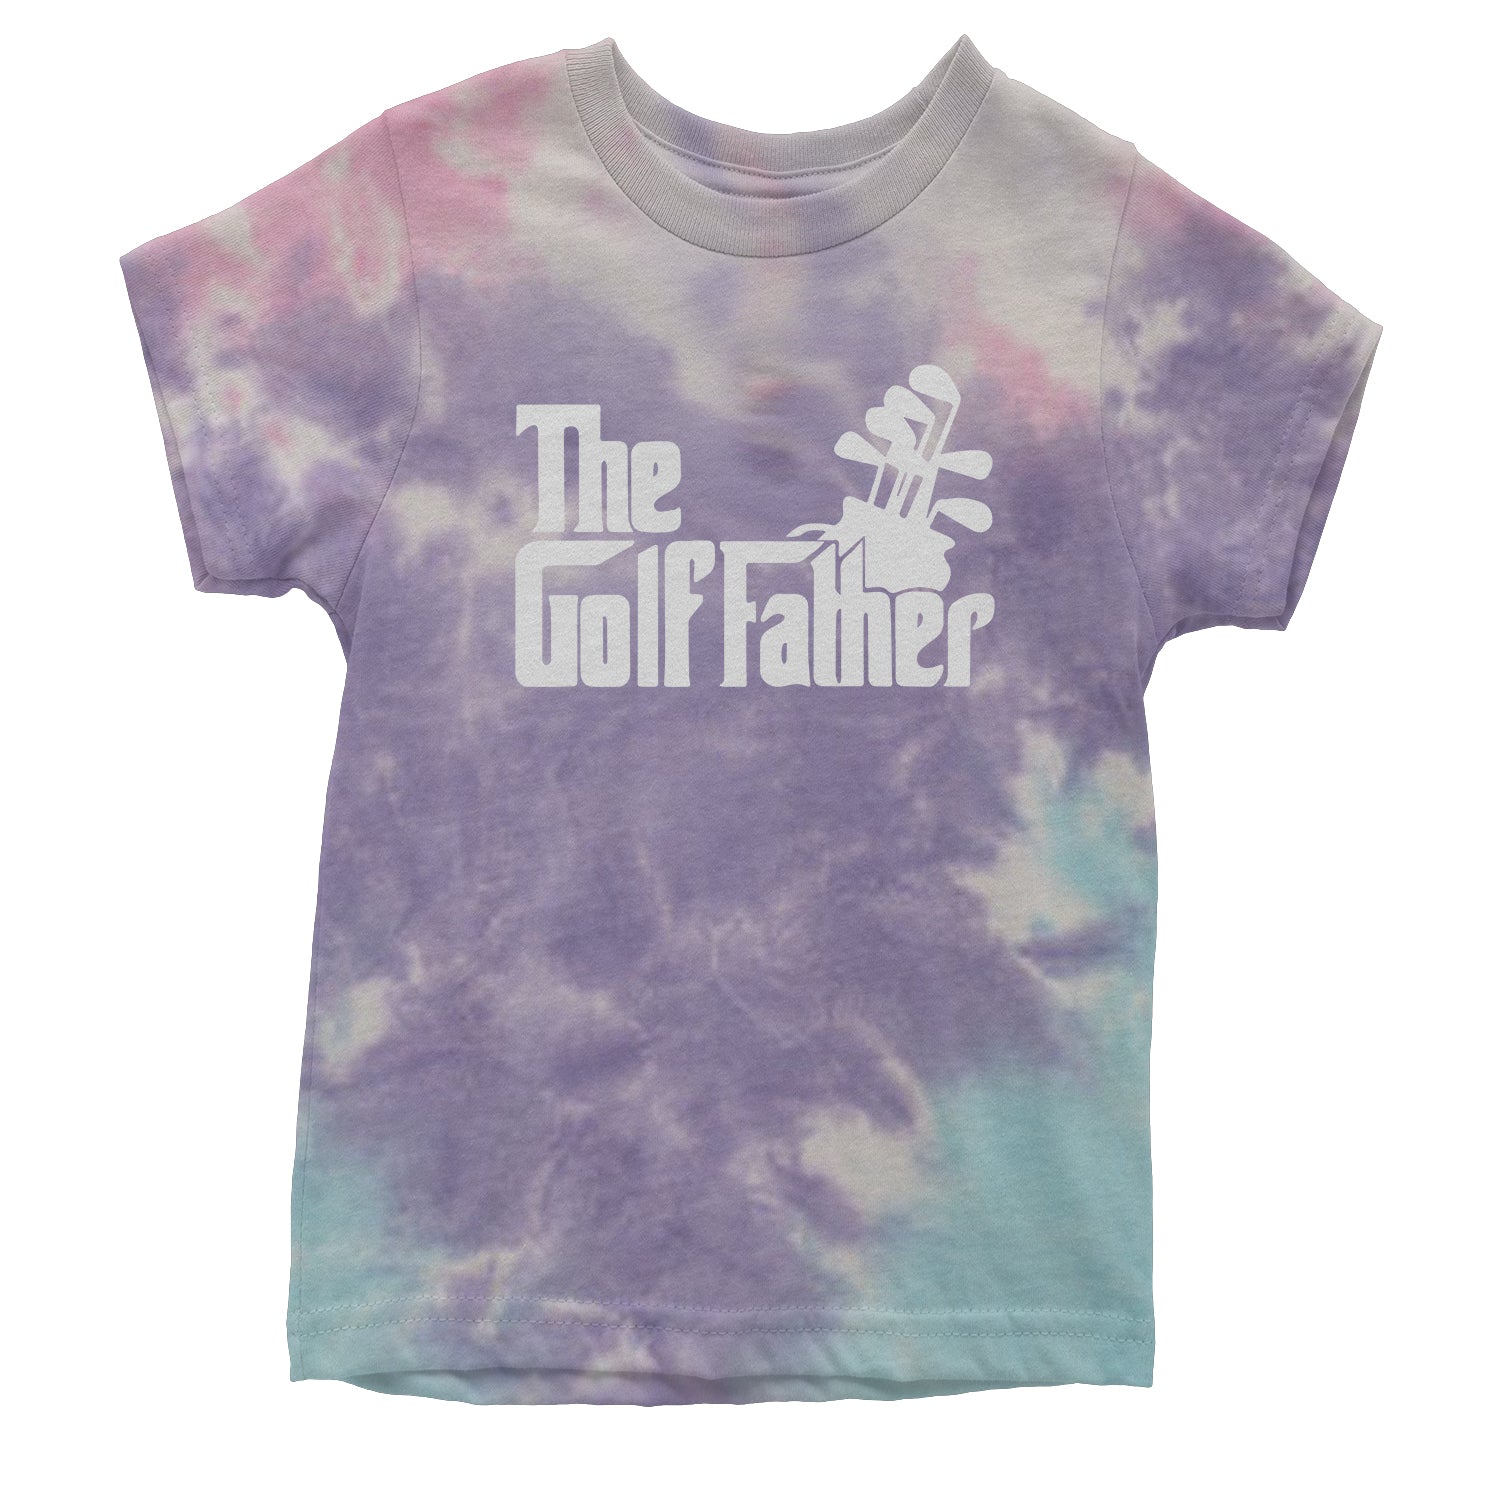 The Golf Father Golfing Dad Youth T-shirt #expressiontees by Expression Tees